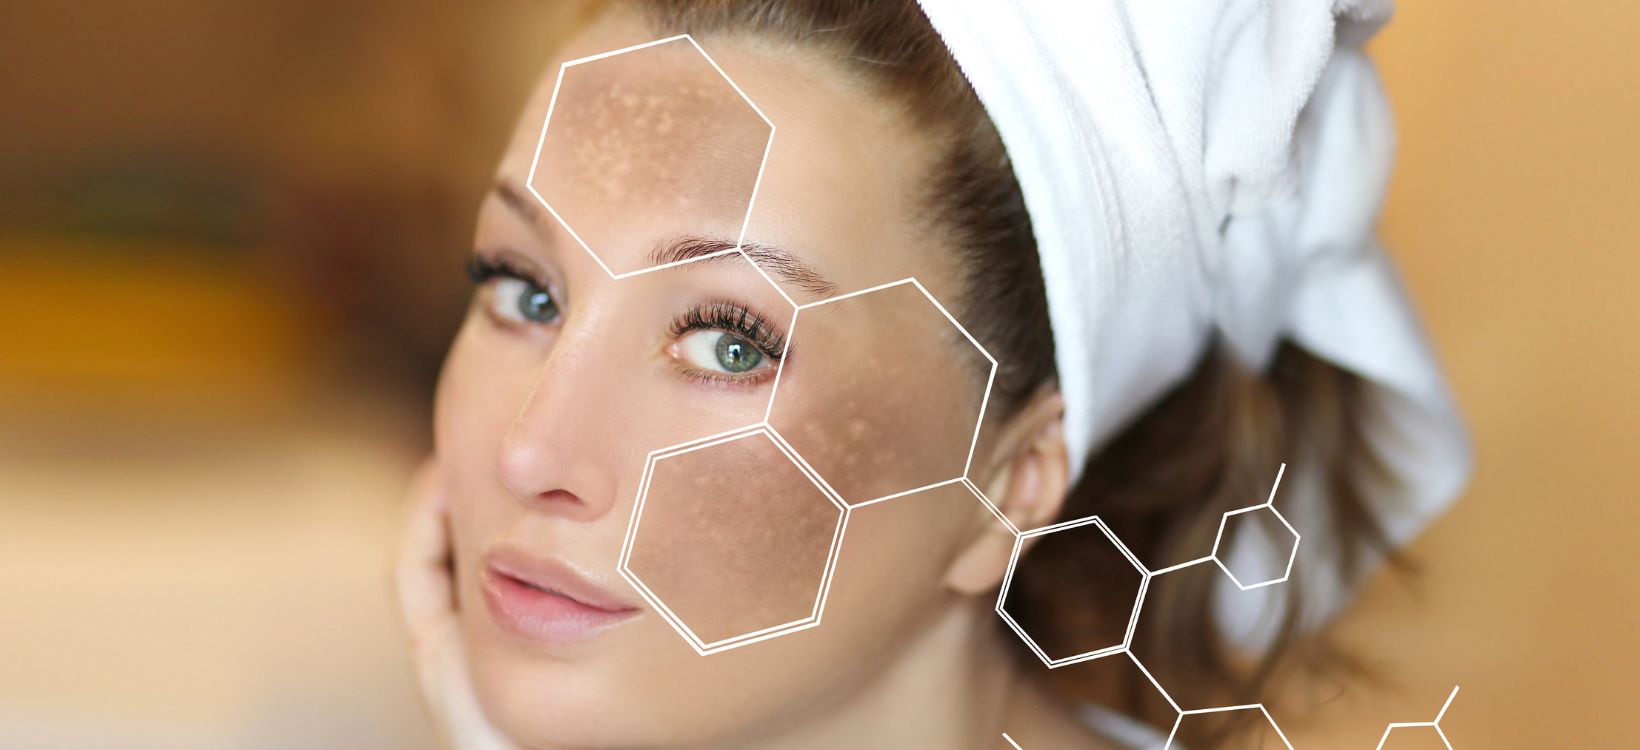 Light therapy for hyperpigmentation